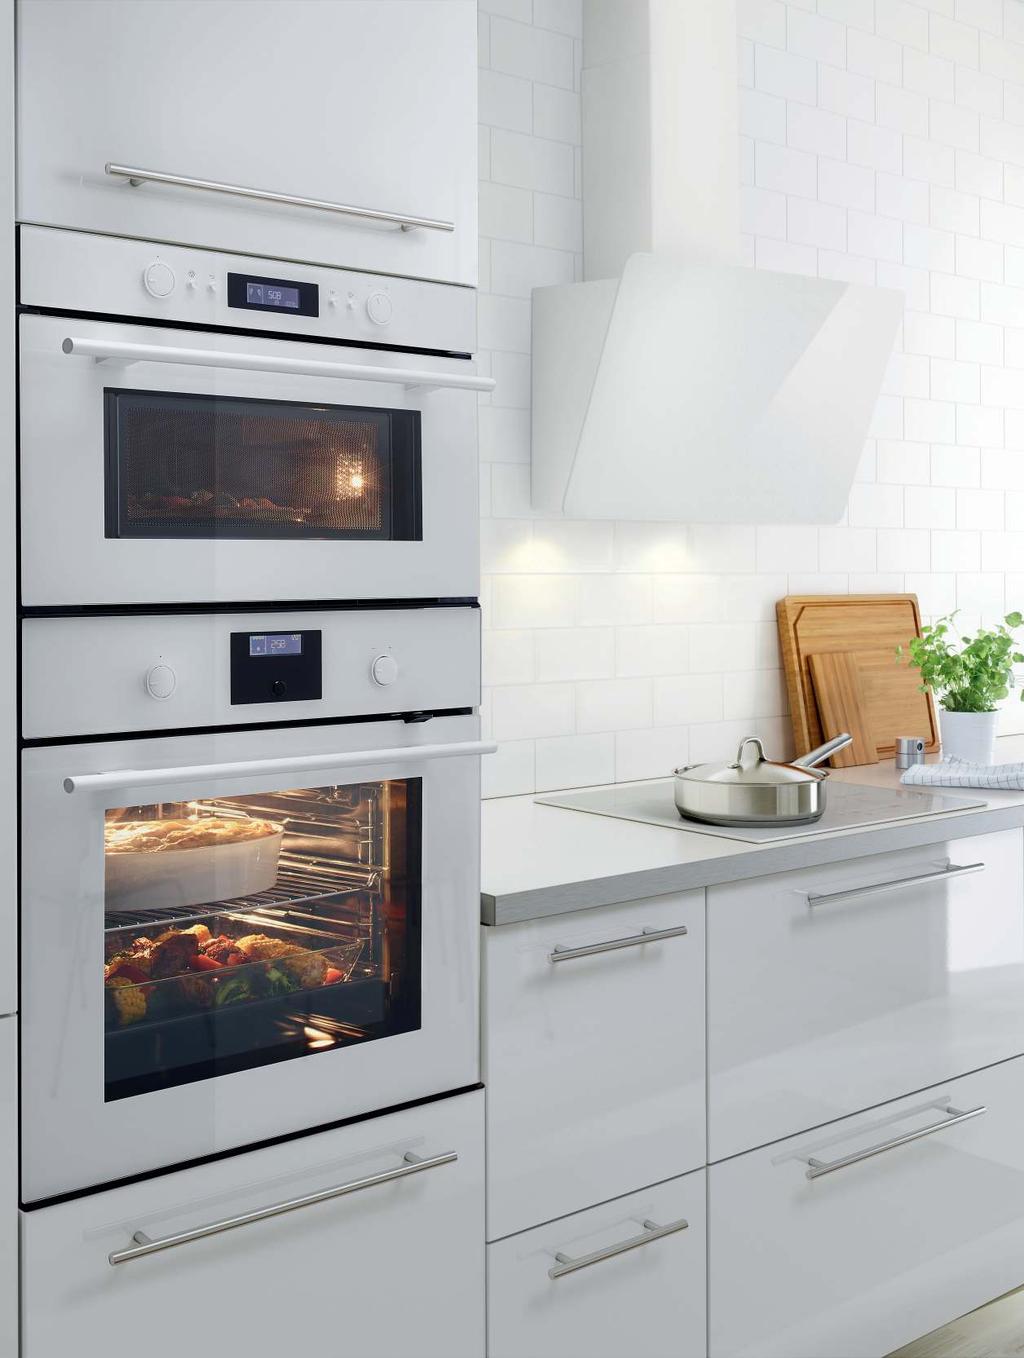 APPLIANCES YOU CAN RELY ON We create appliances that make your everyday life easier and help you live a more sustainable life at home.